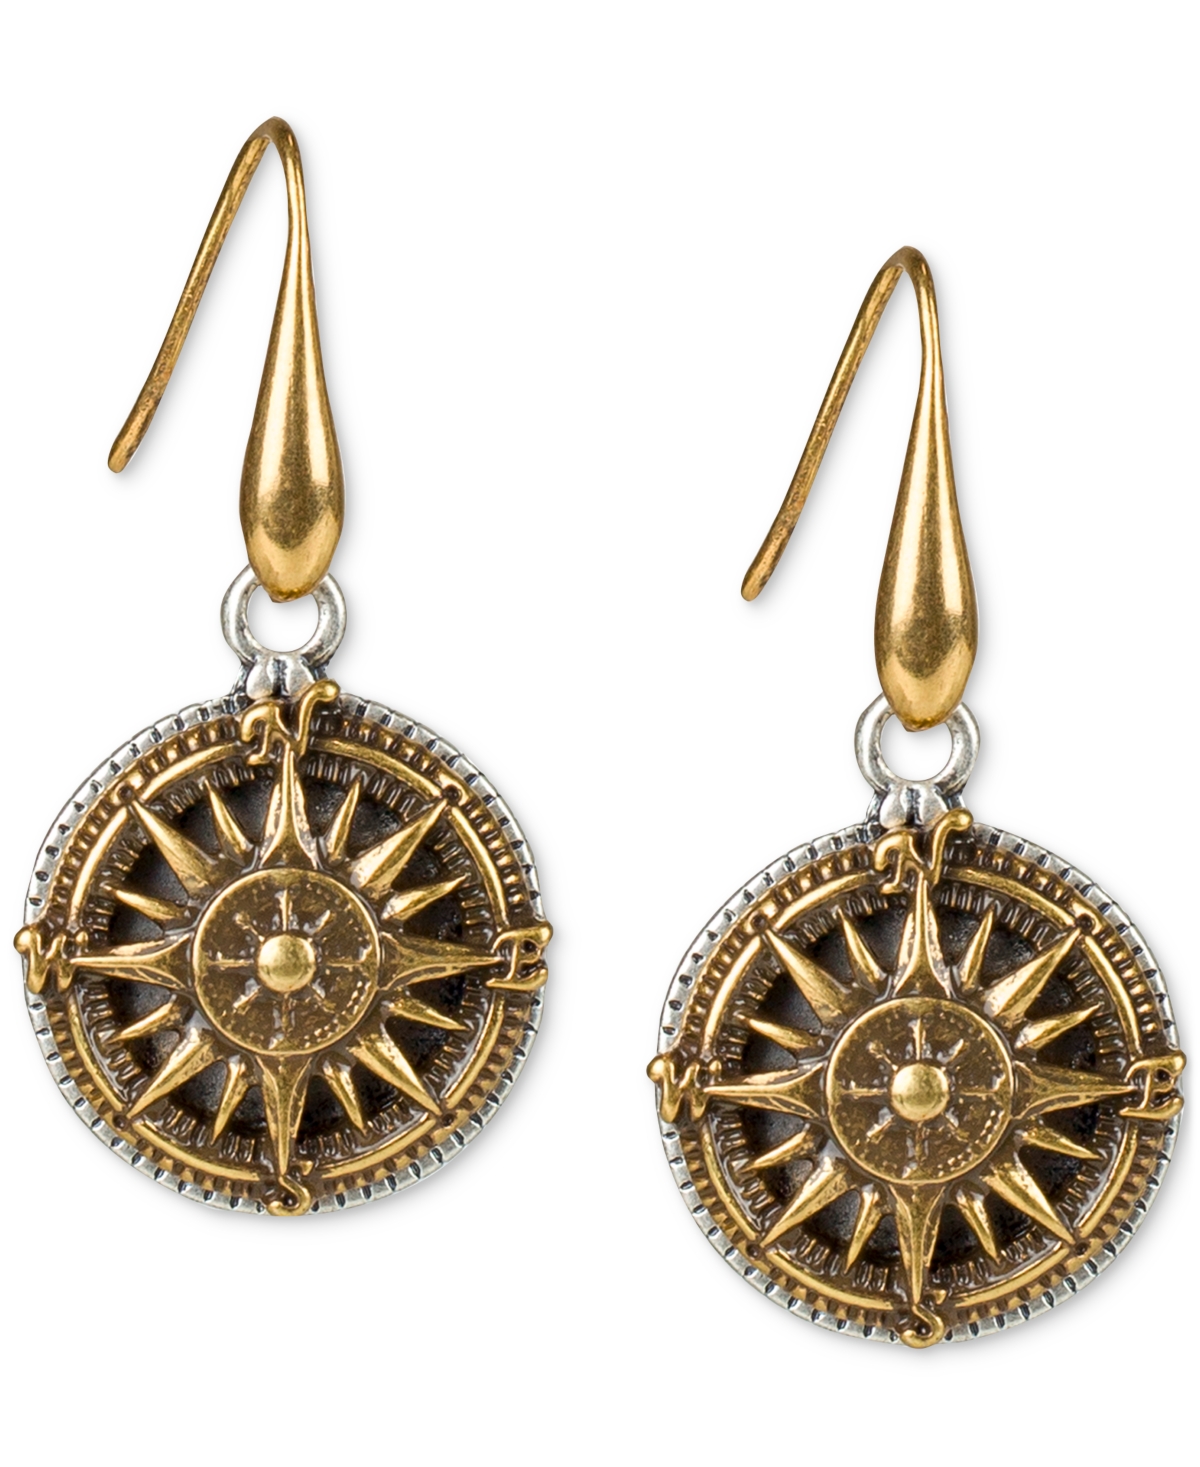 Gold-Tone Compass Drop Earrings - Silver